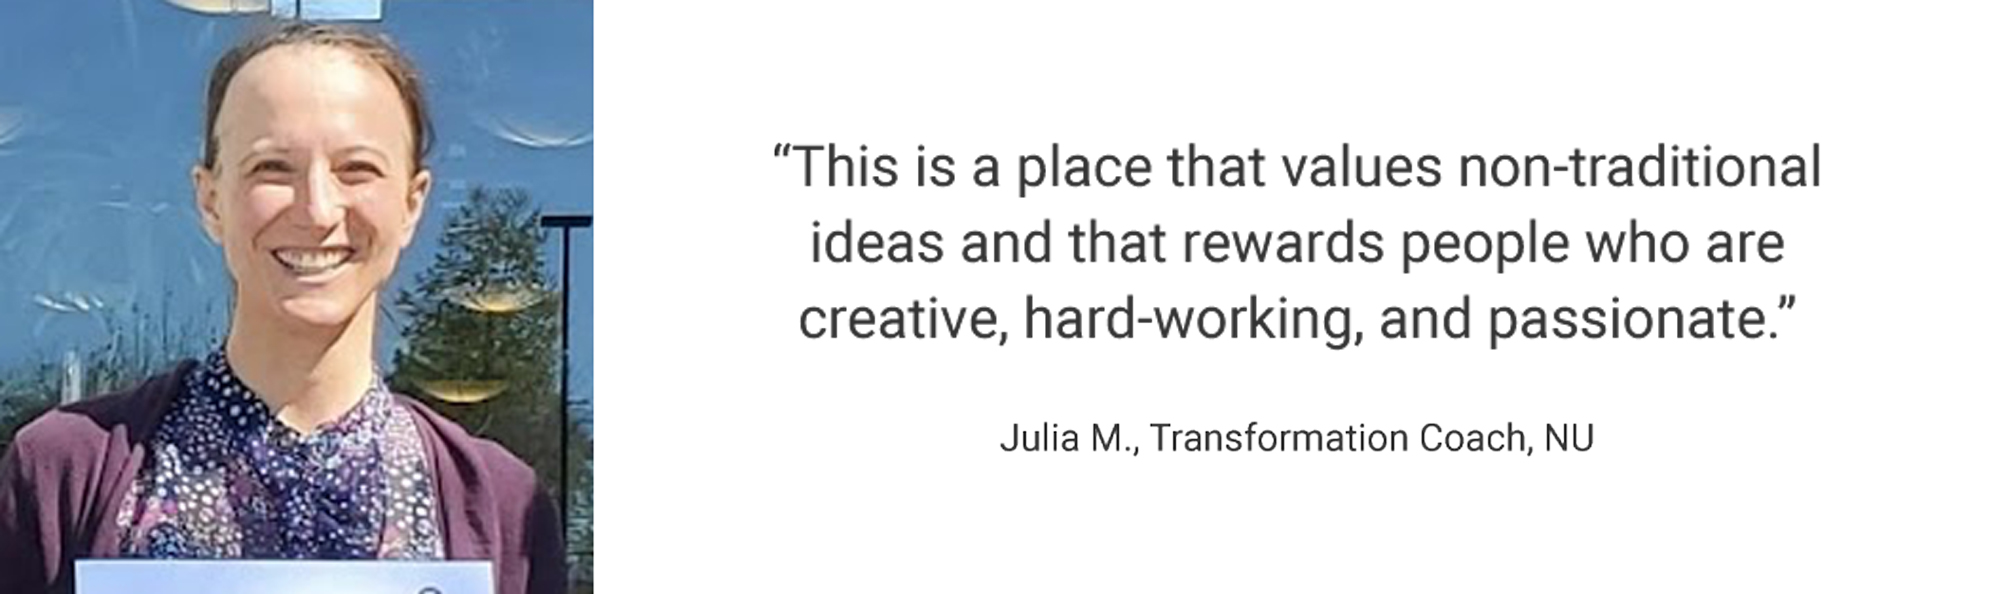 Employee Testimonial, "This is a place that values non-traditional ideas and that rewards people who are creative, hard-working, and passionate." Julia M., Transformation Coach, NU